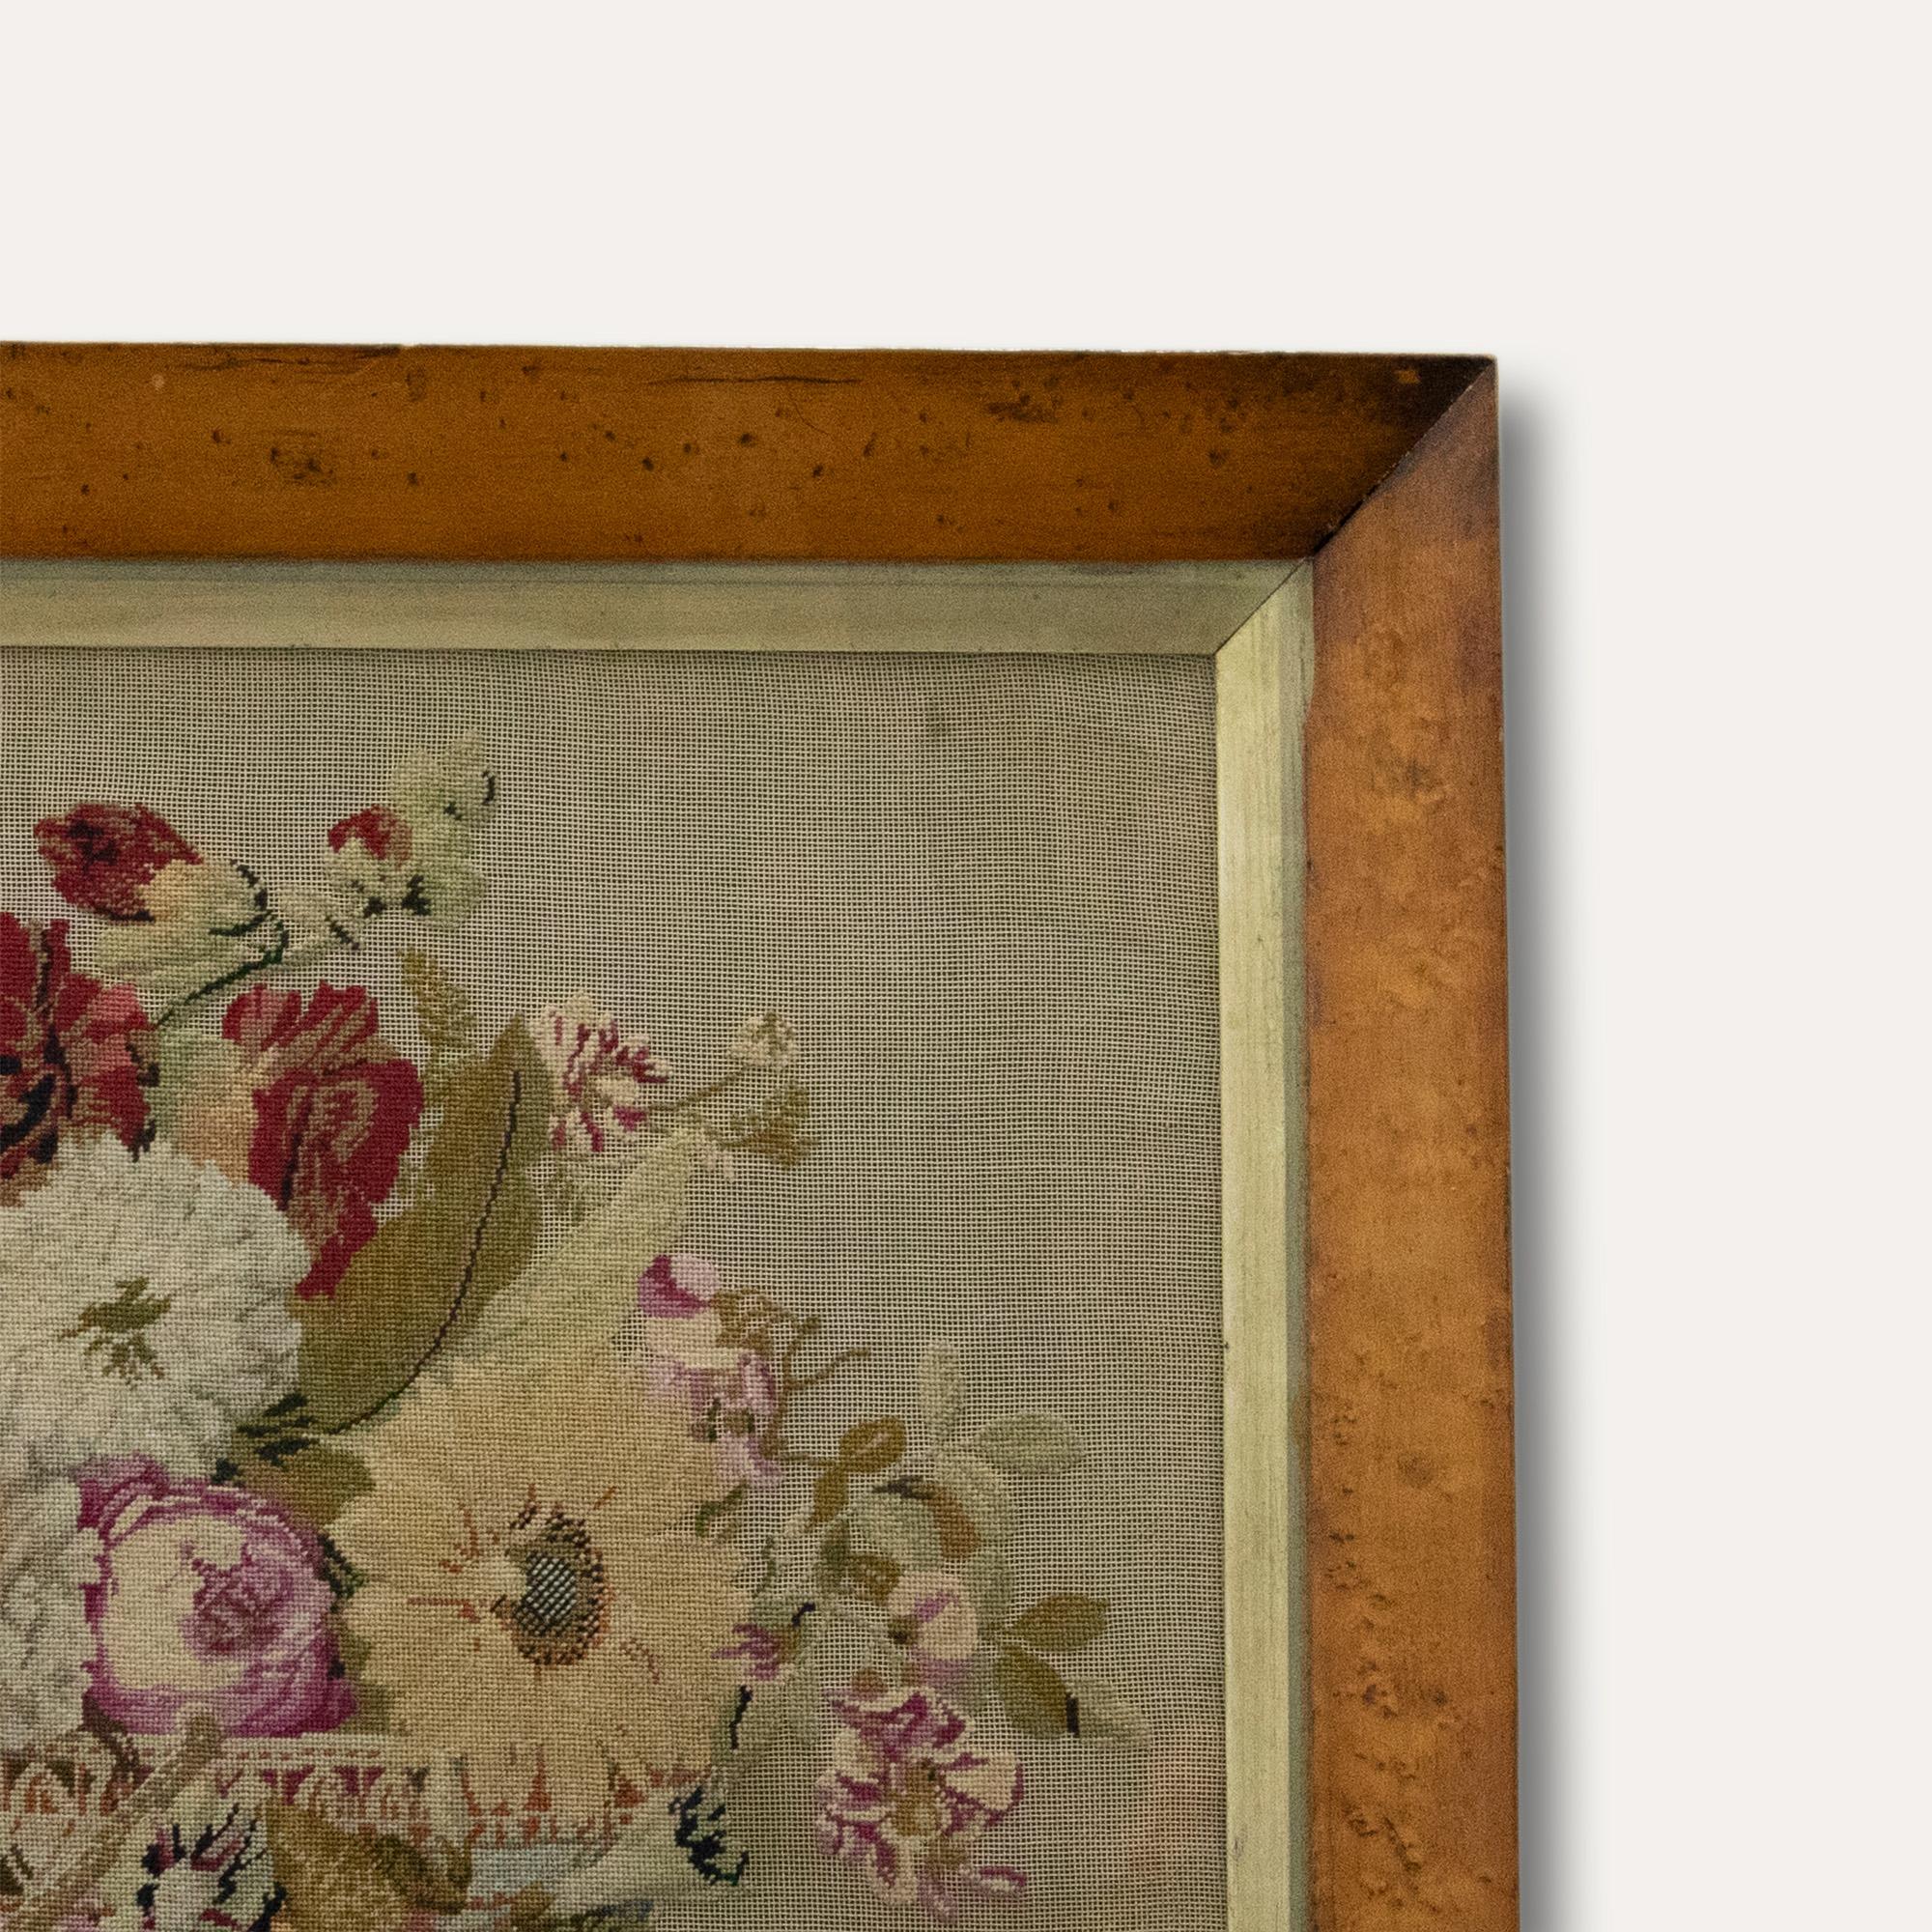 An exquisite needlework picture depicting a still life of garden flowers inside a pierced china basket. Beautifully mounted in a period bird's eye maple frame with internal slip and glazing. On linen.